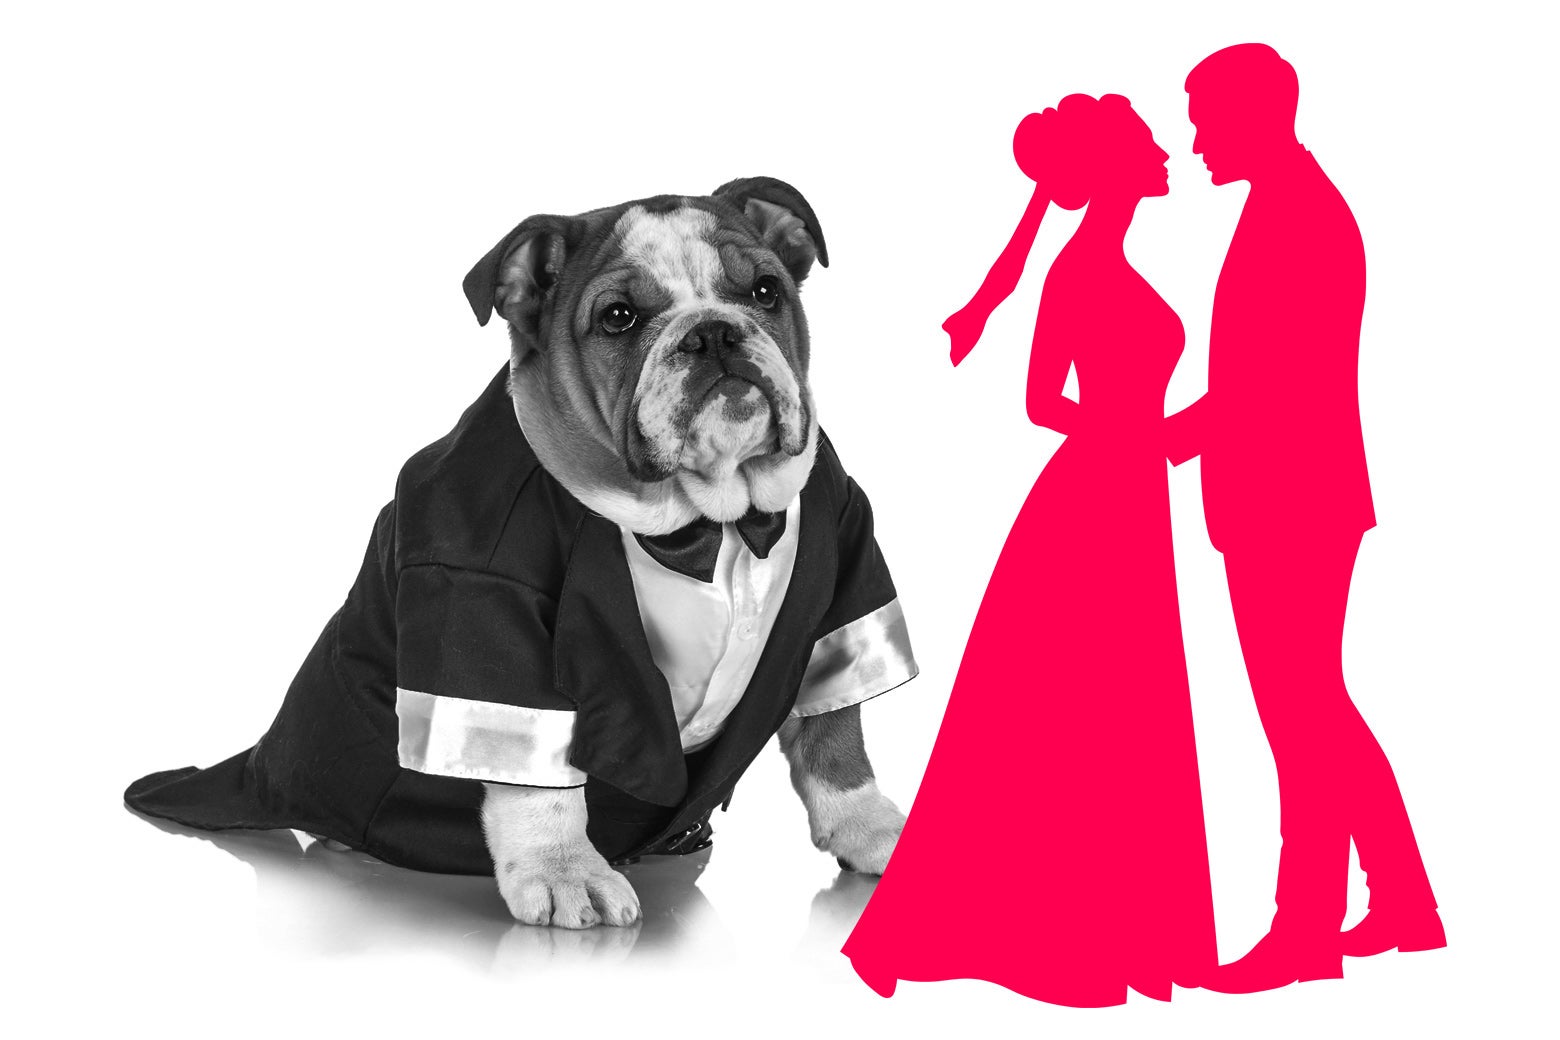 A dog in a tux next to a bride and groom.